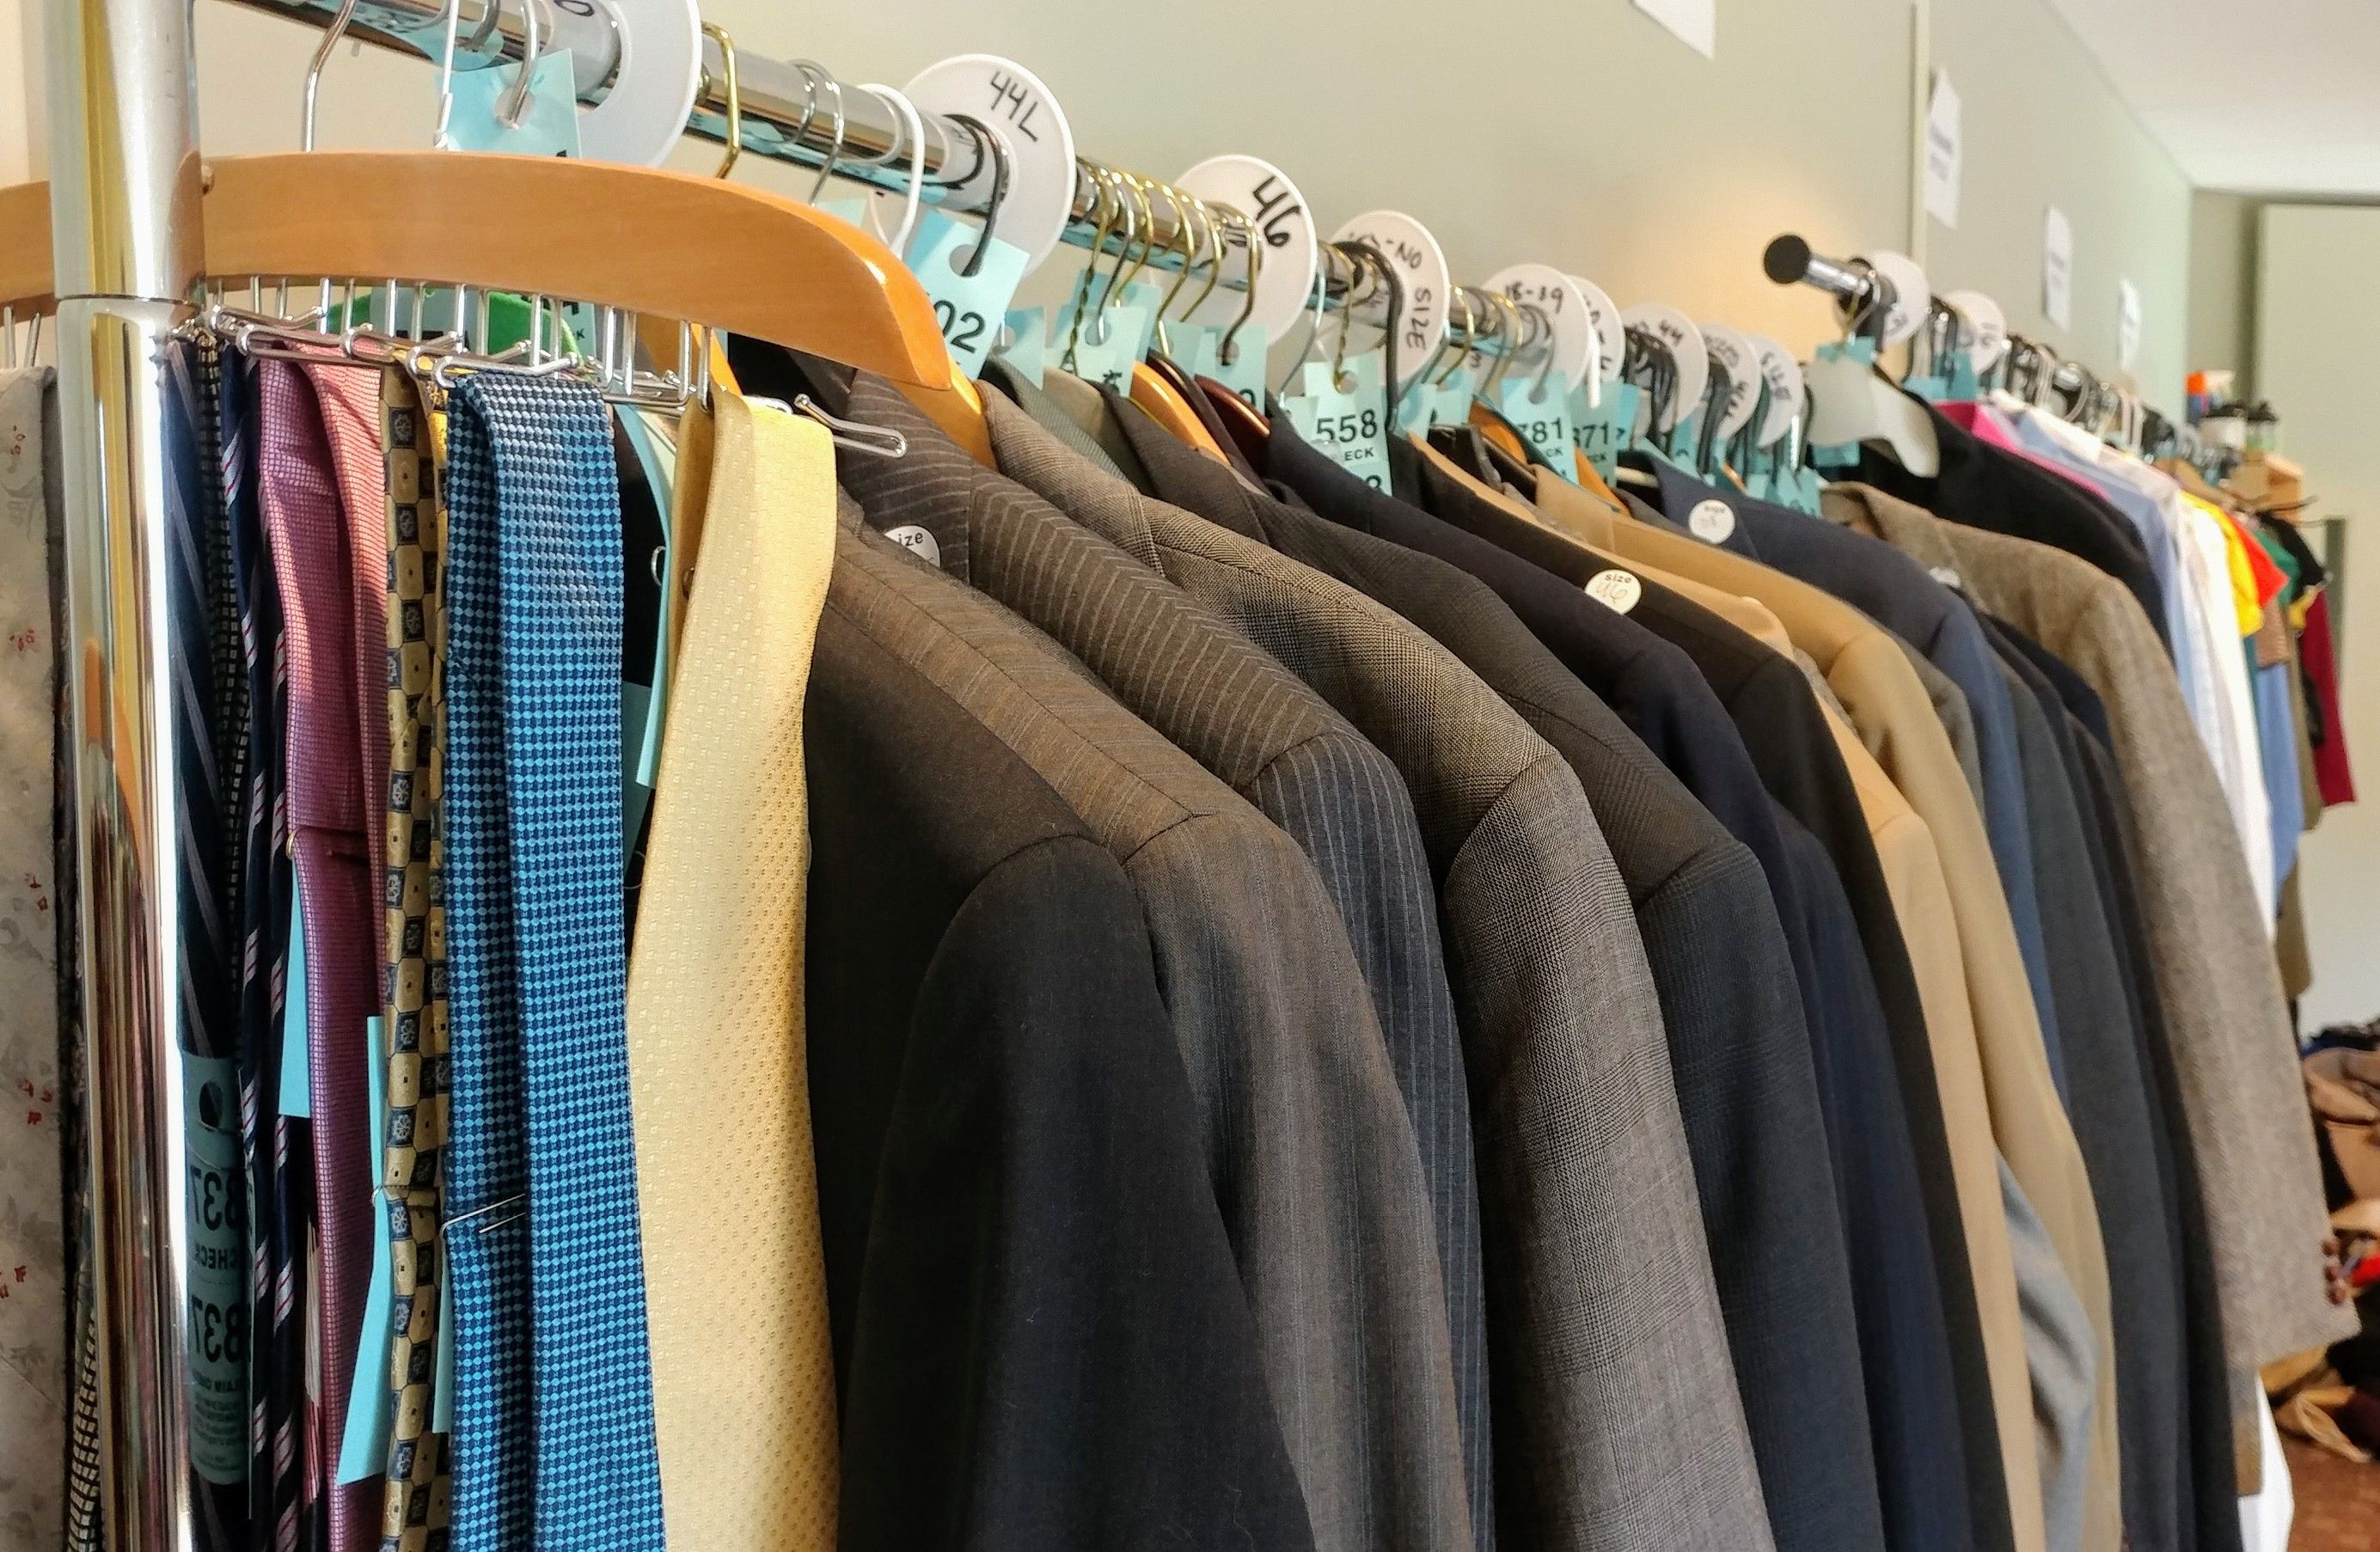 professional clothes lining racks